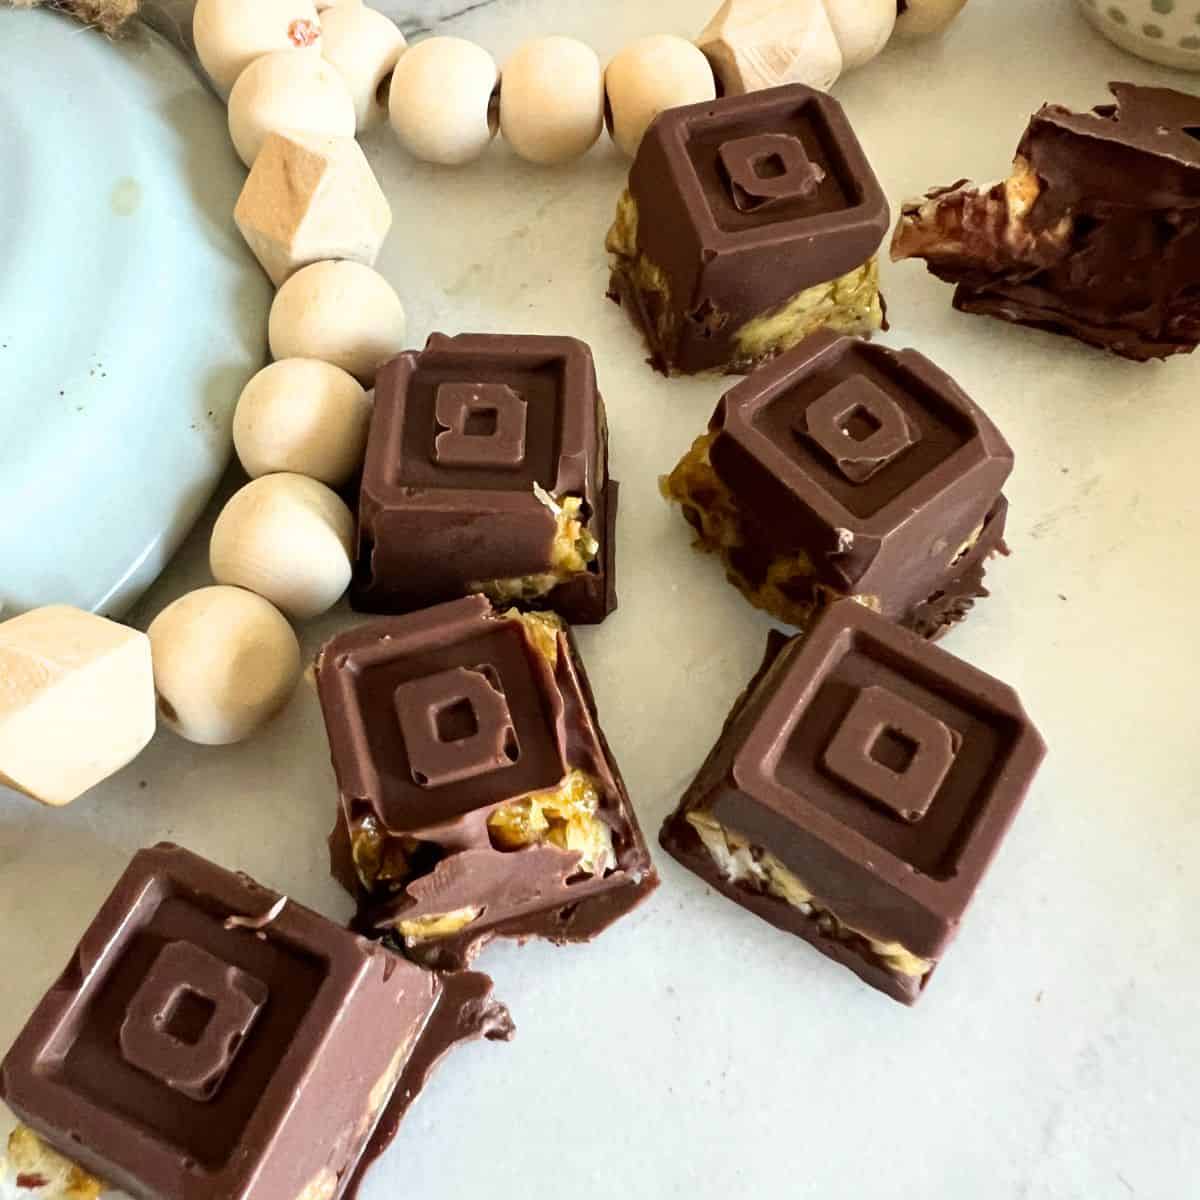 This viral homemade dubai chocolate candy bar is really fun to make (if you can find all these ingredients and tools to make them)